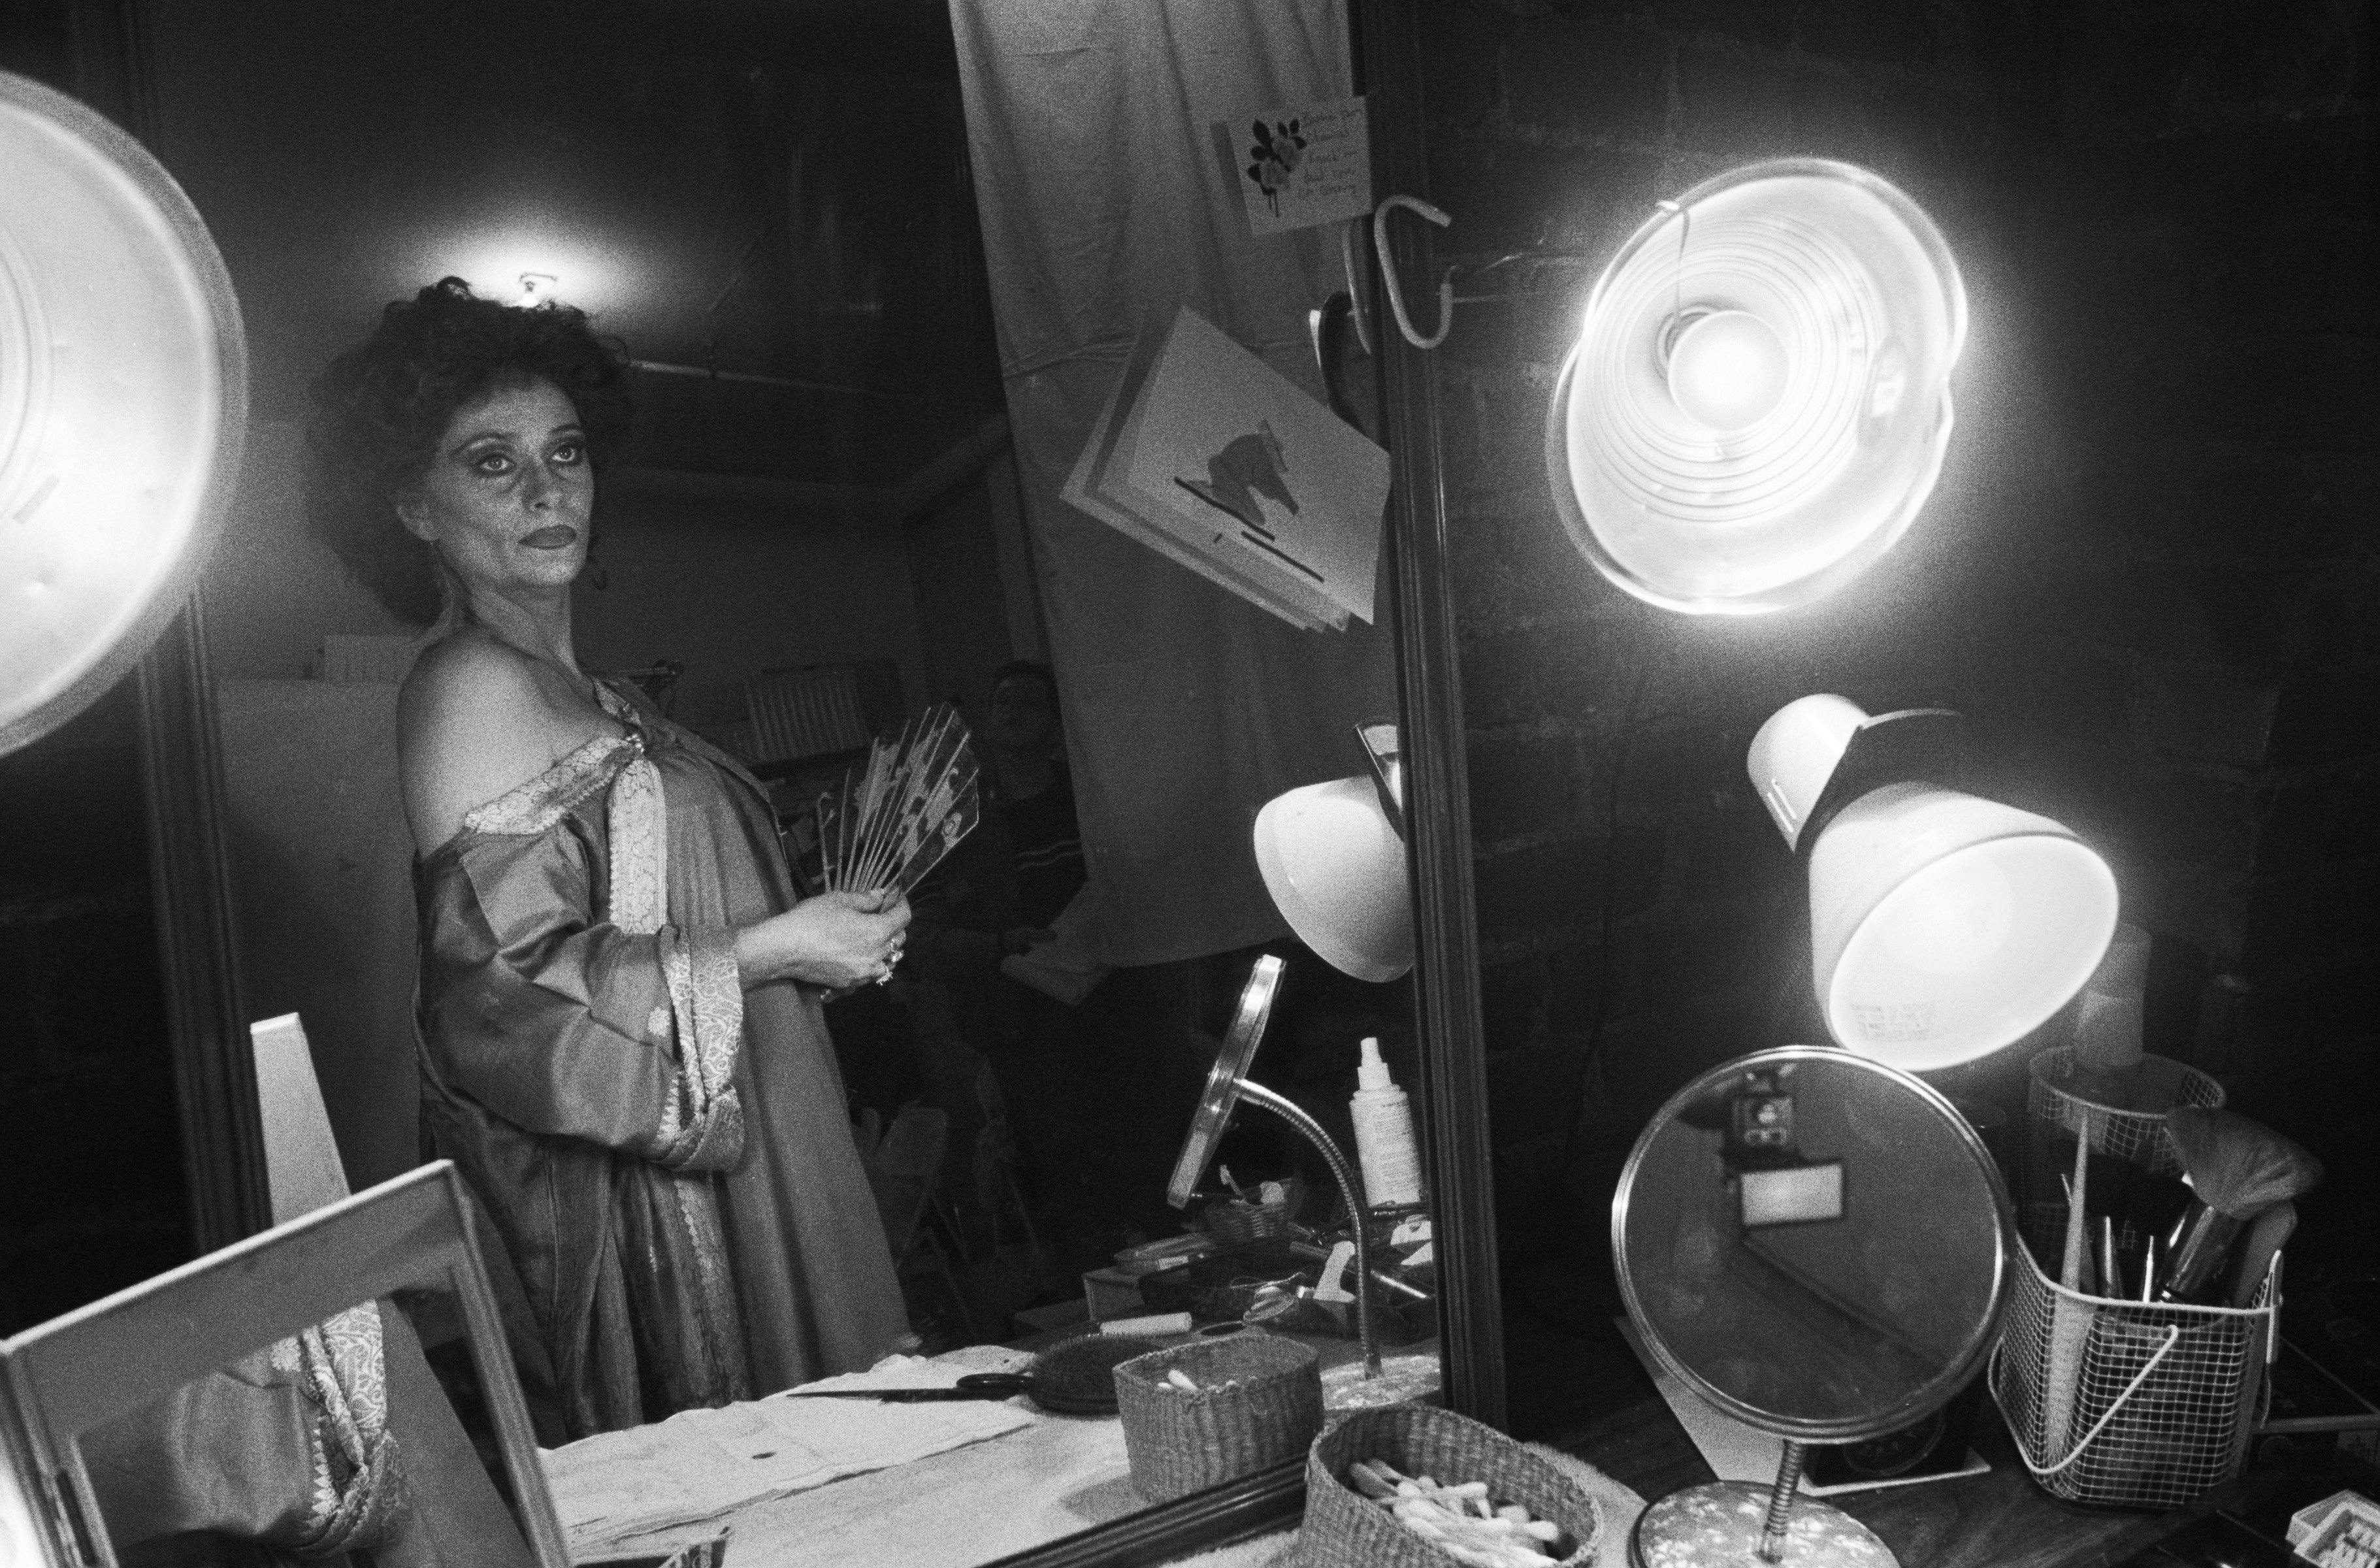 Elizabeth Ashley looks at herself in a mirror in this black-and-white shot.